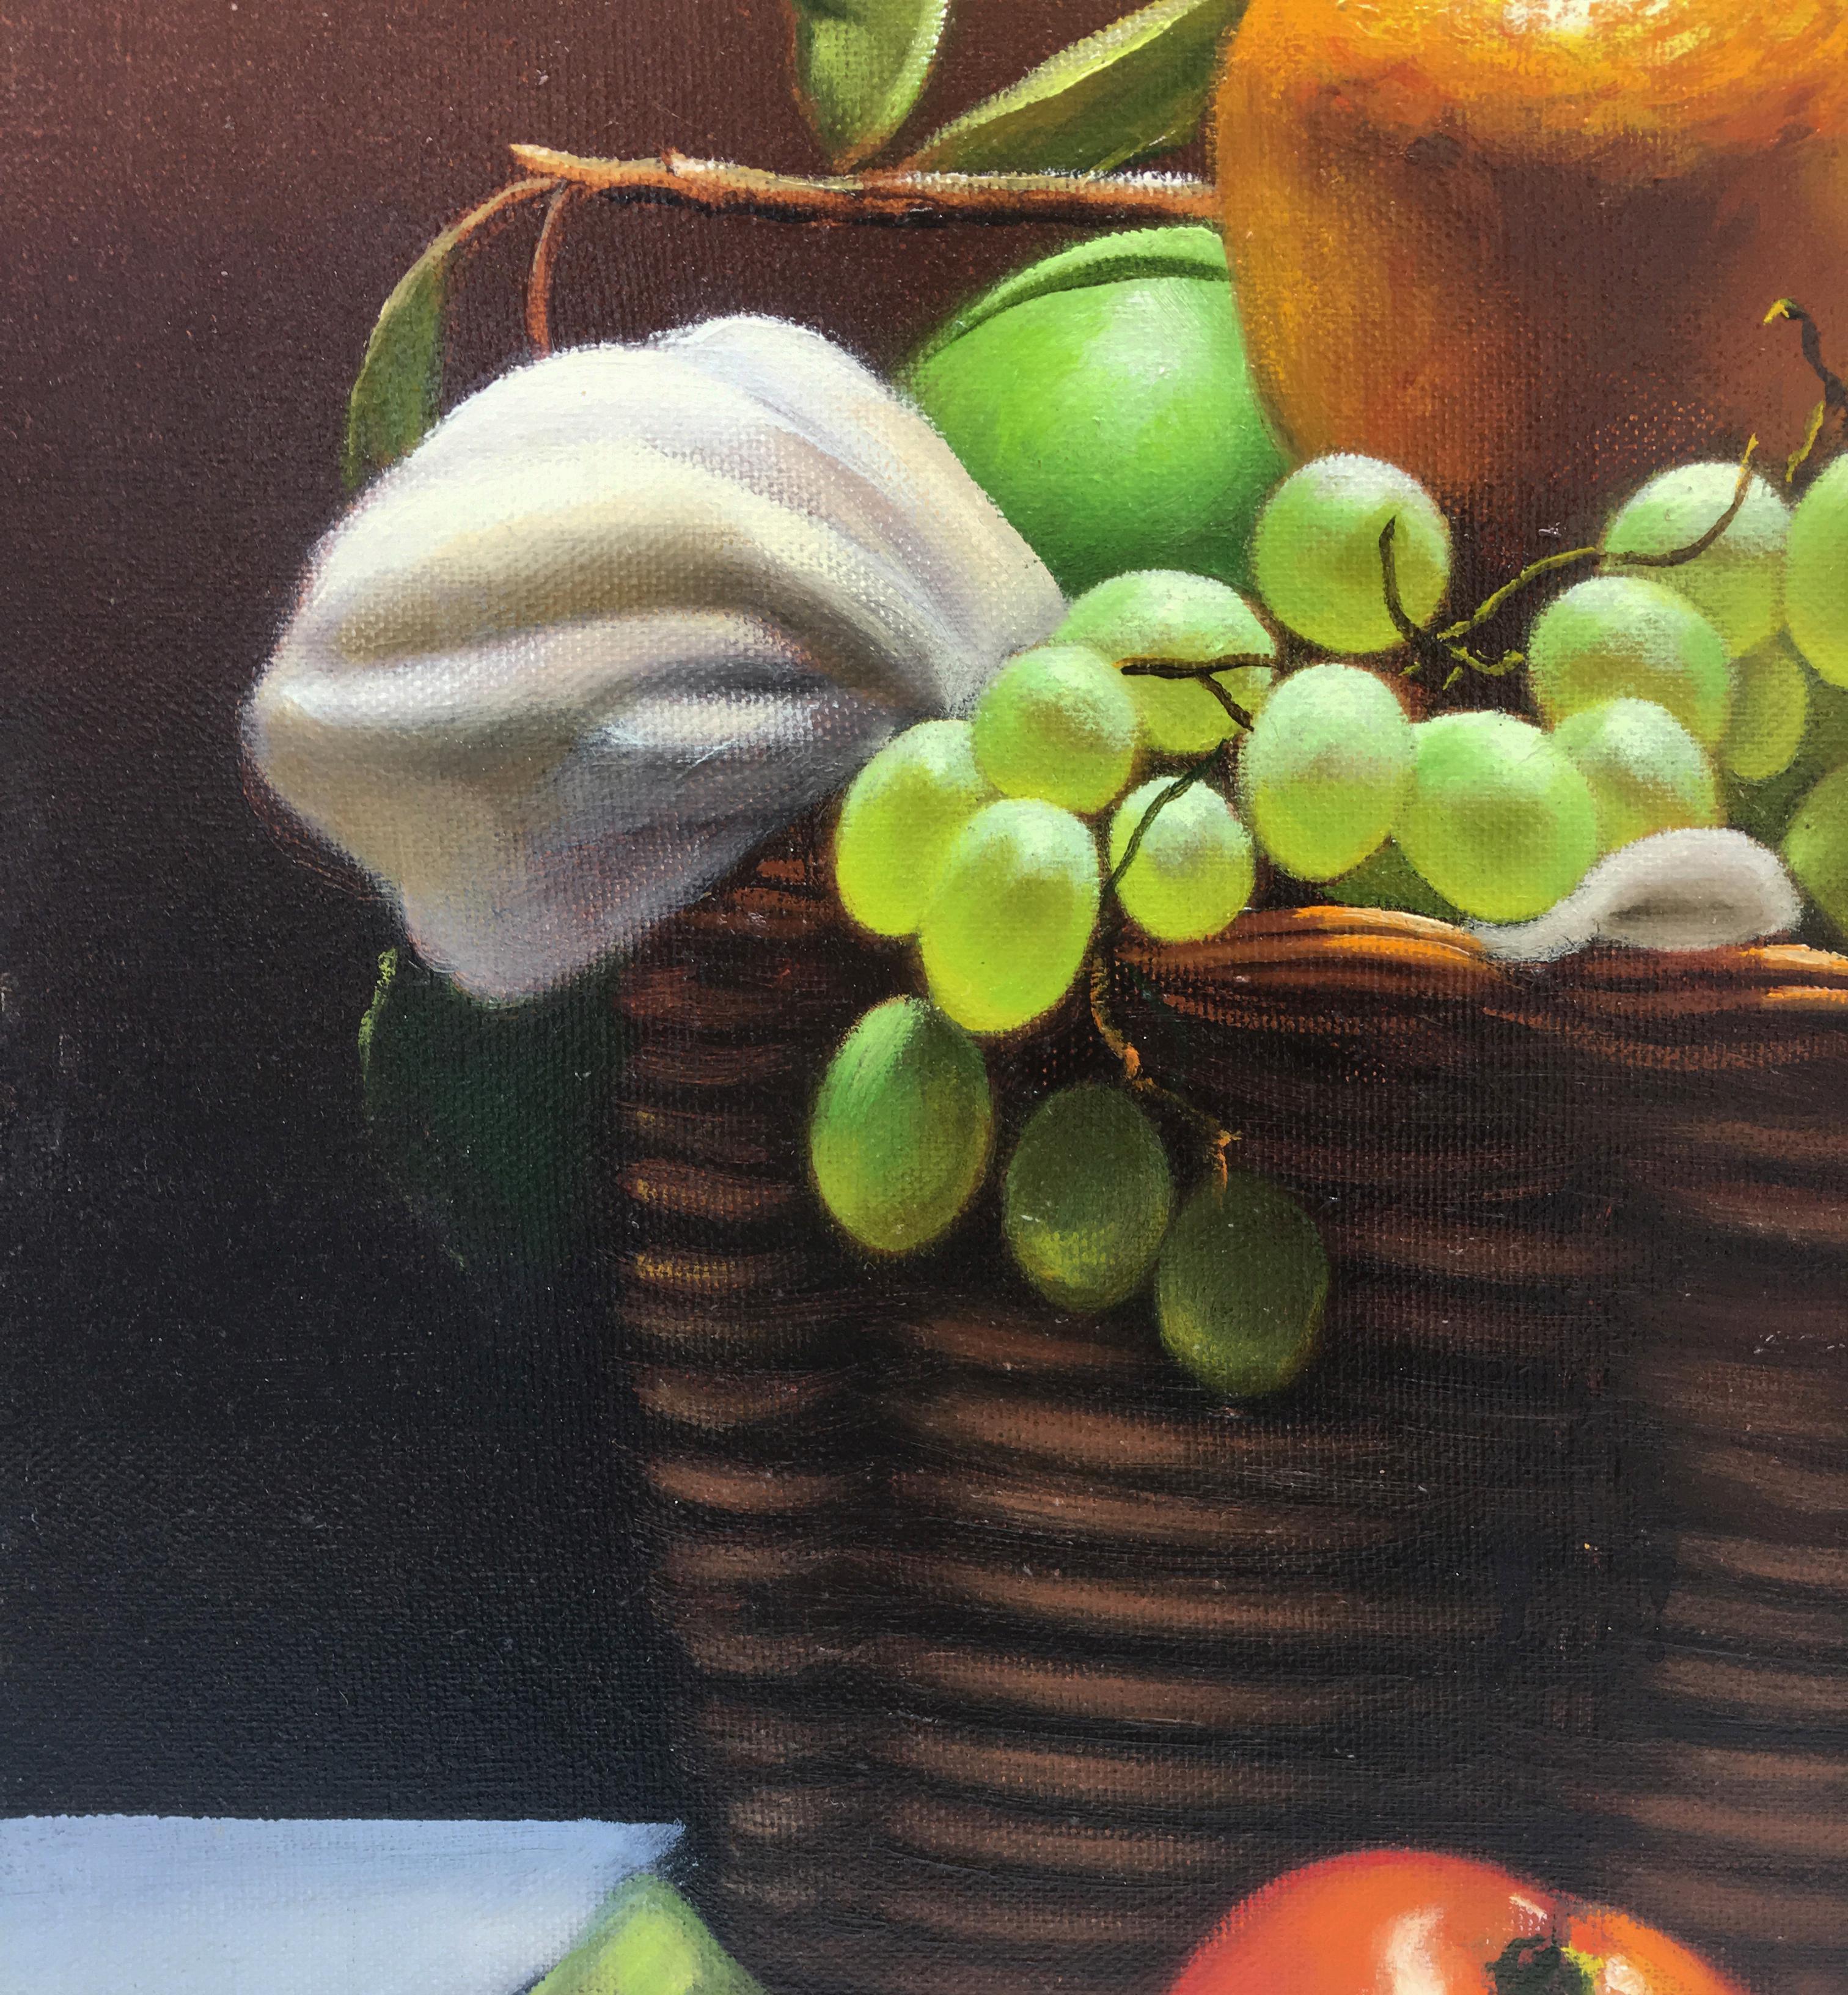 BASKET OF FRUIT - Hyperrealism - Italian still life oil on canvas painting,  - Black Still-Life Painting by Maximilian Ciccone